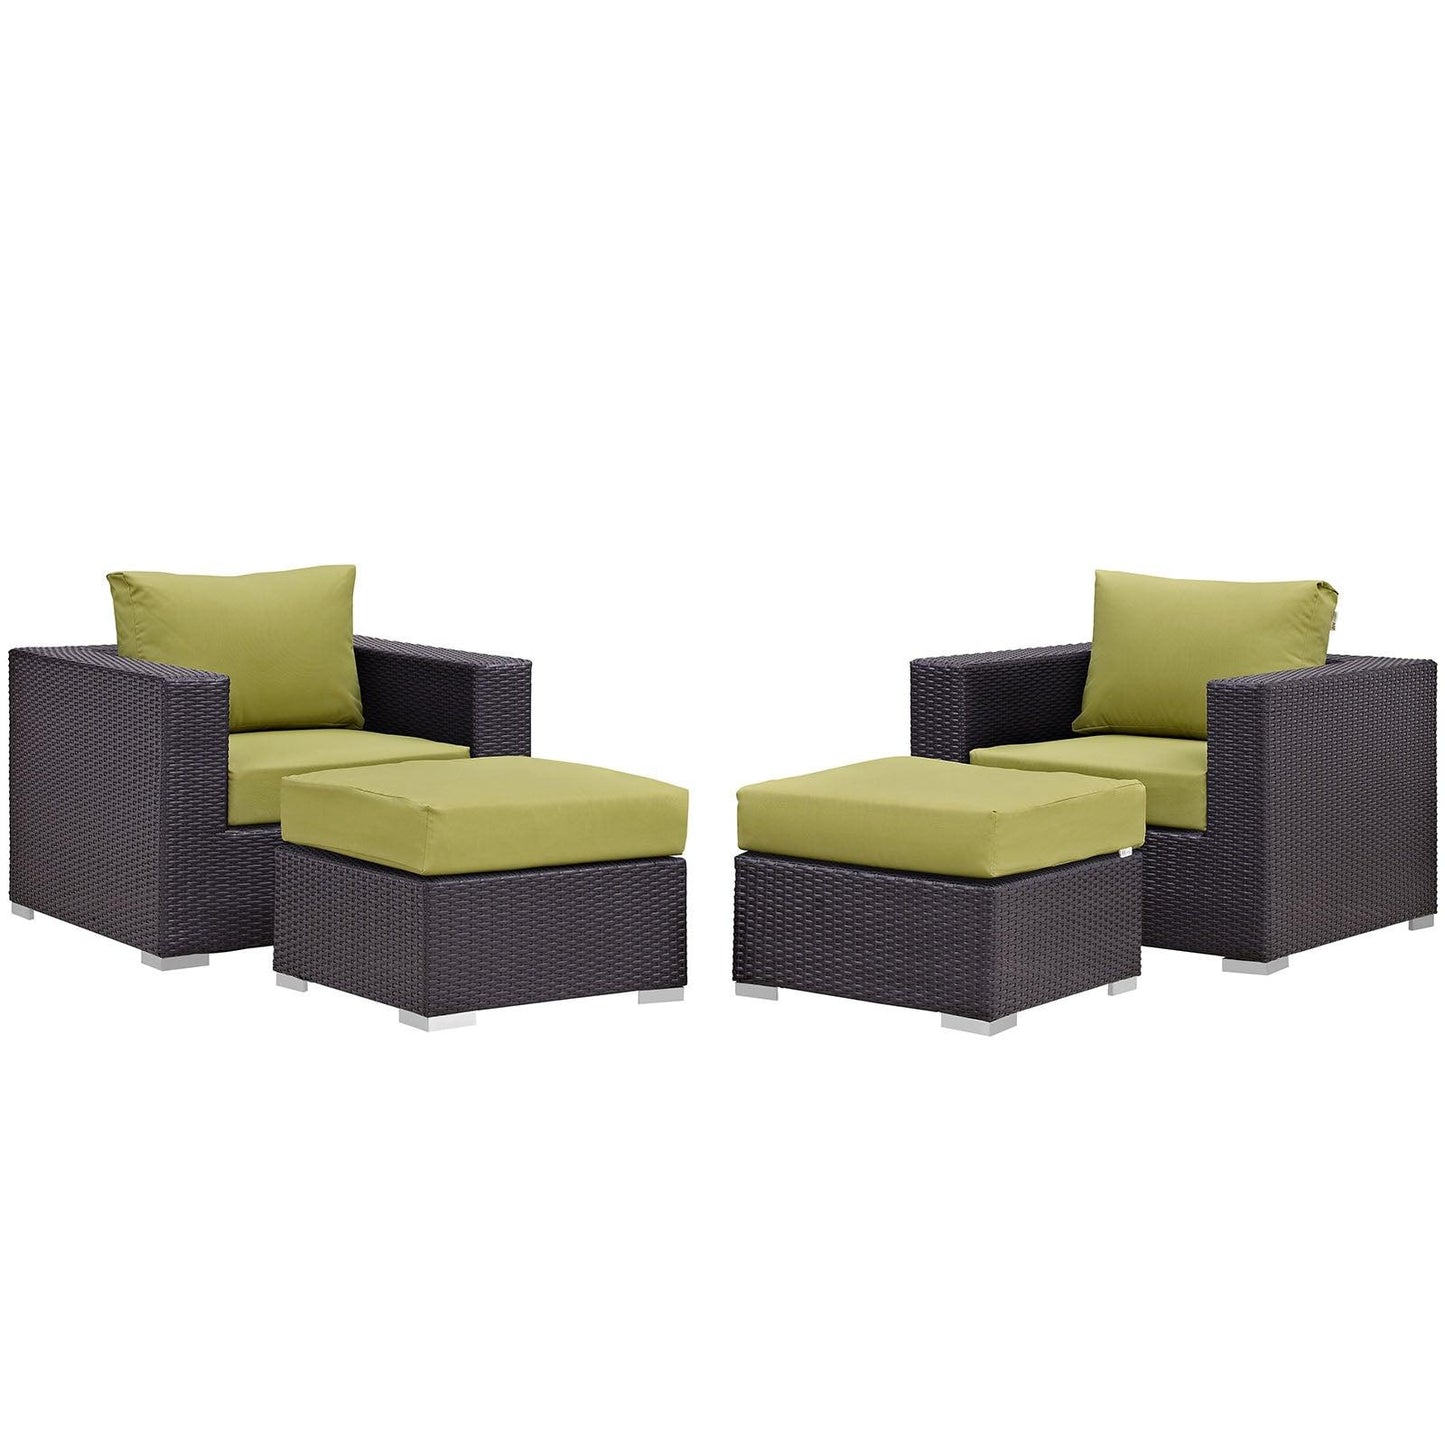 Modway Convene 4 Piece Outdoor Patio Sectional Set FredCo